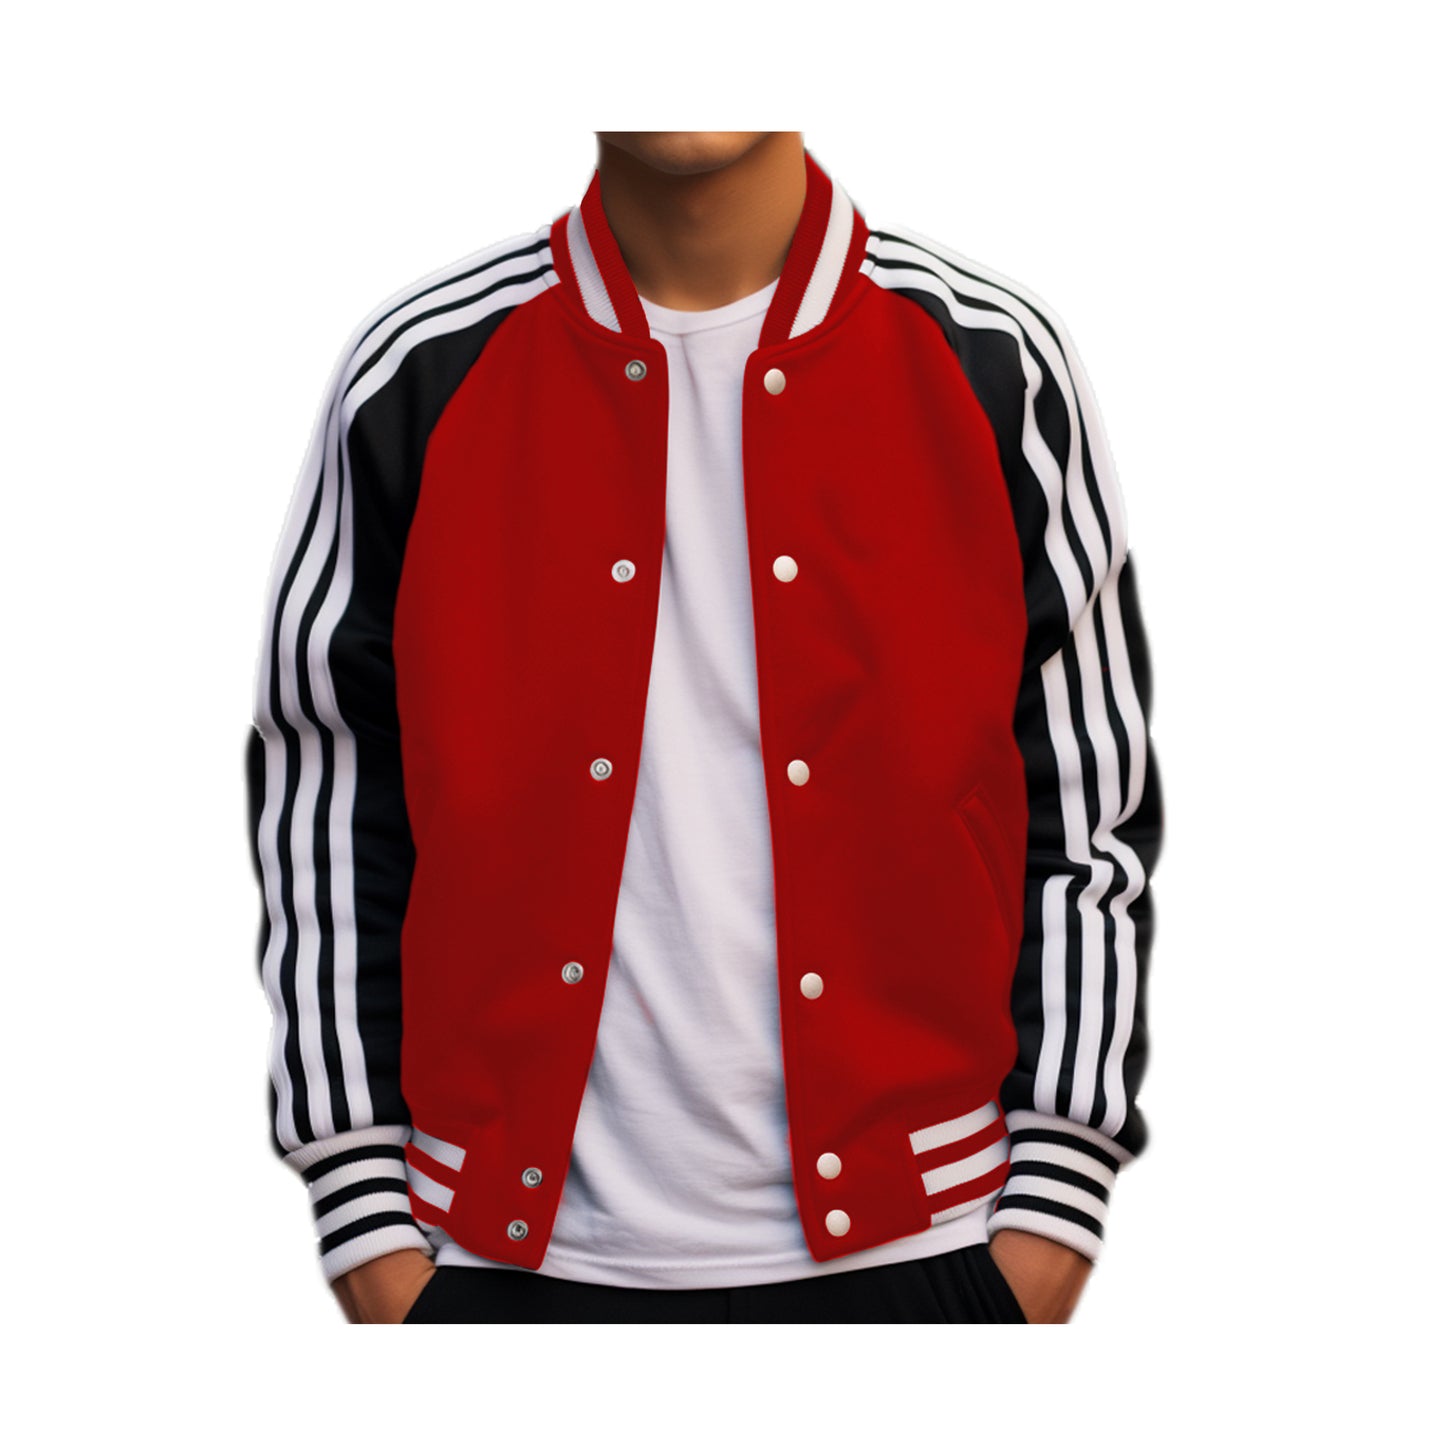 Red And Black Striped Varsity Jacket